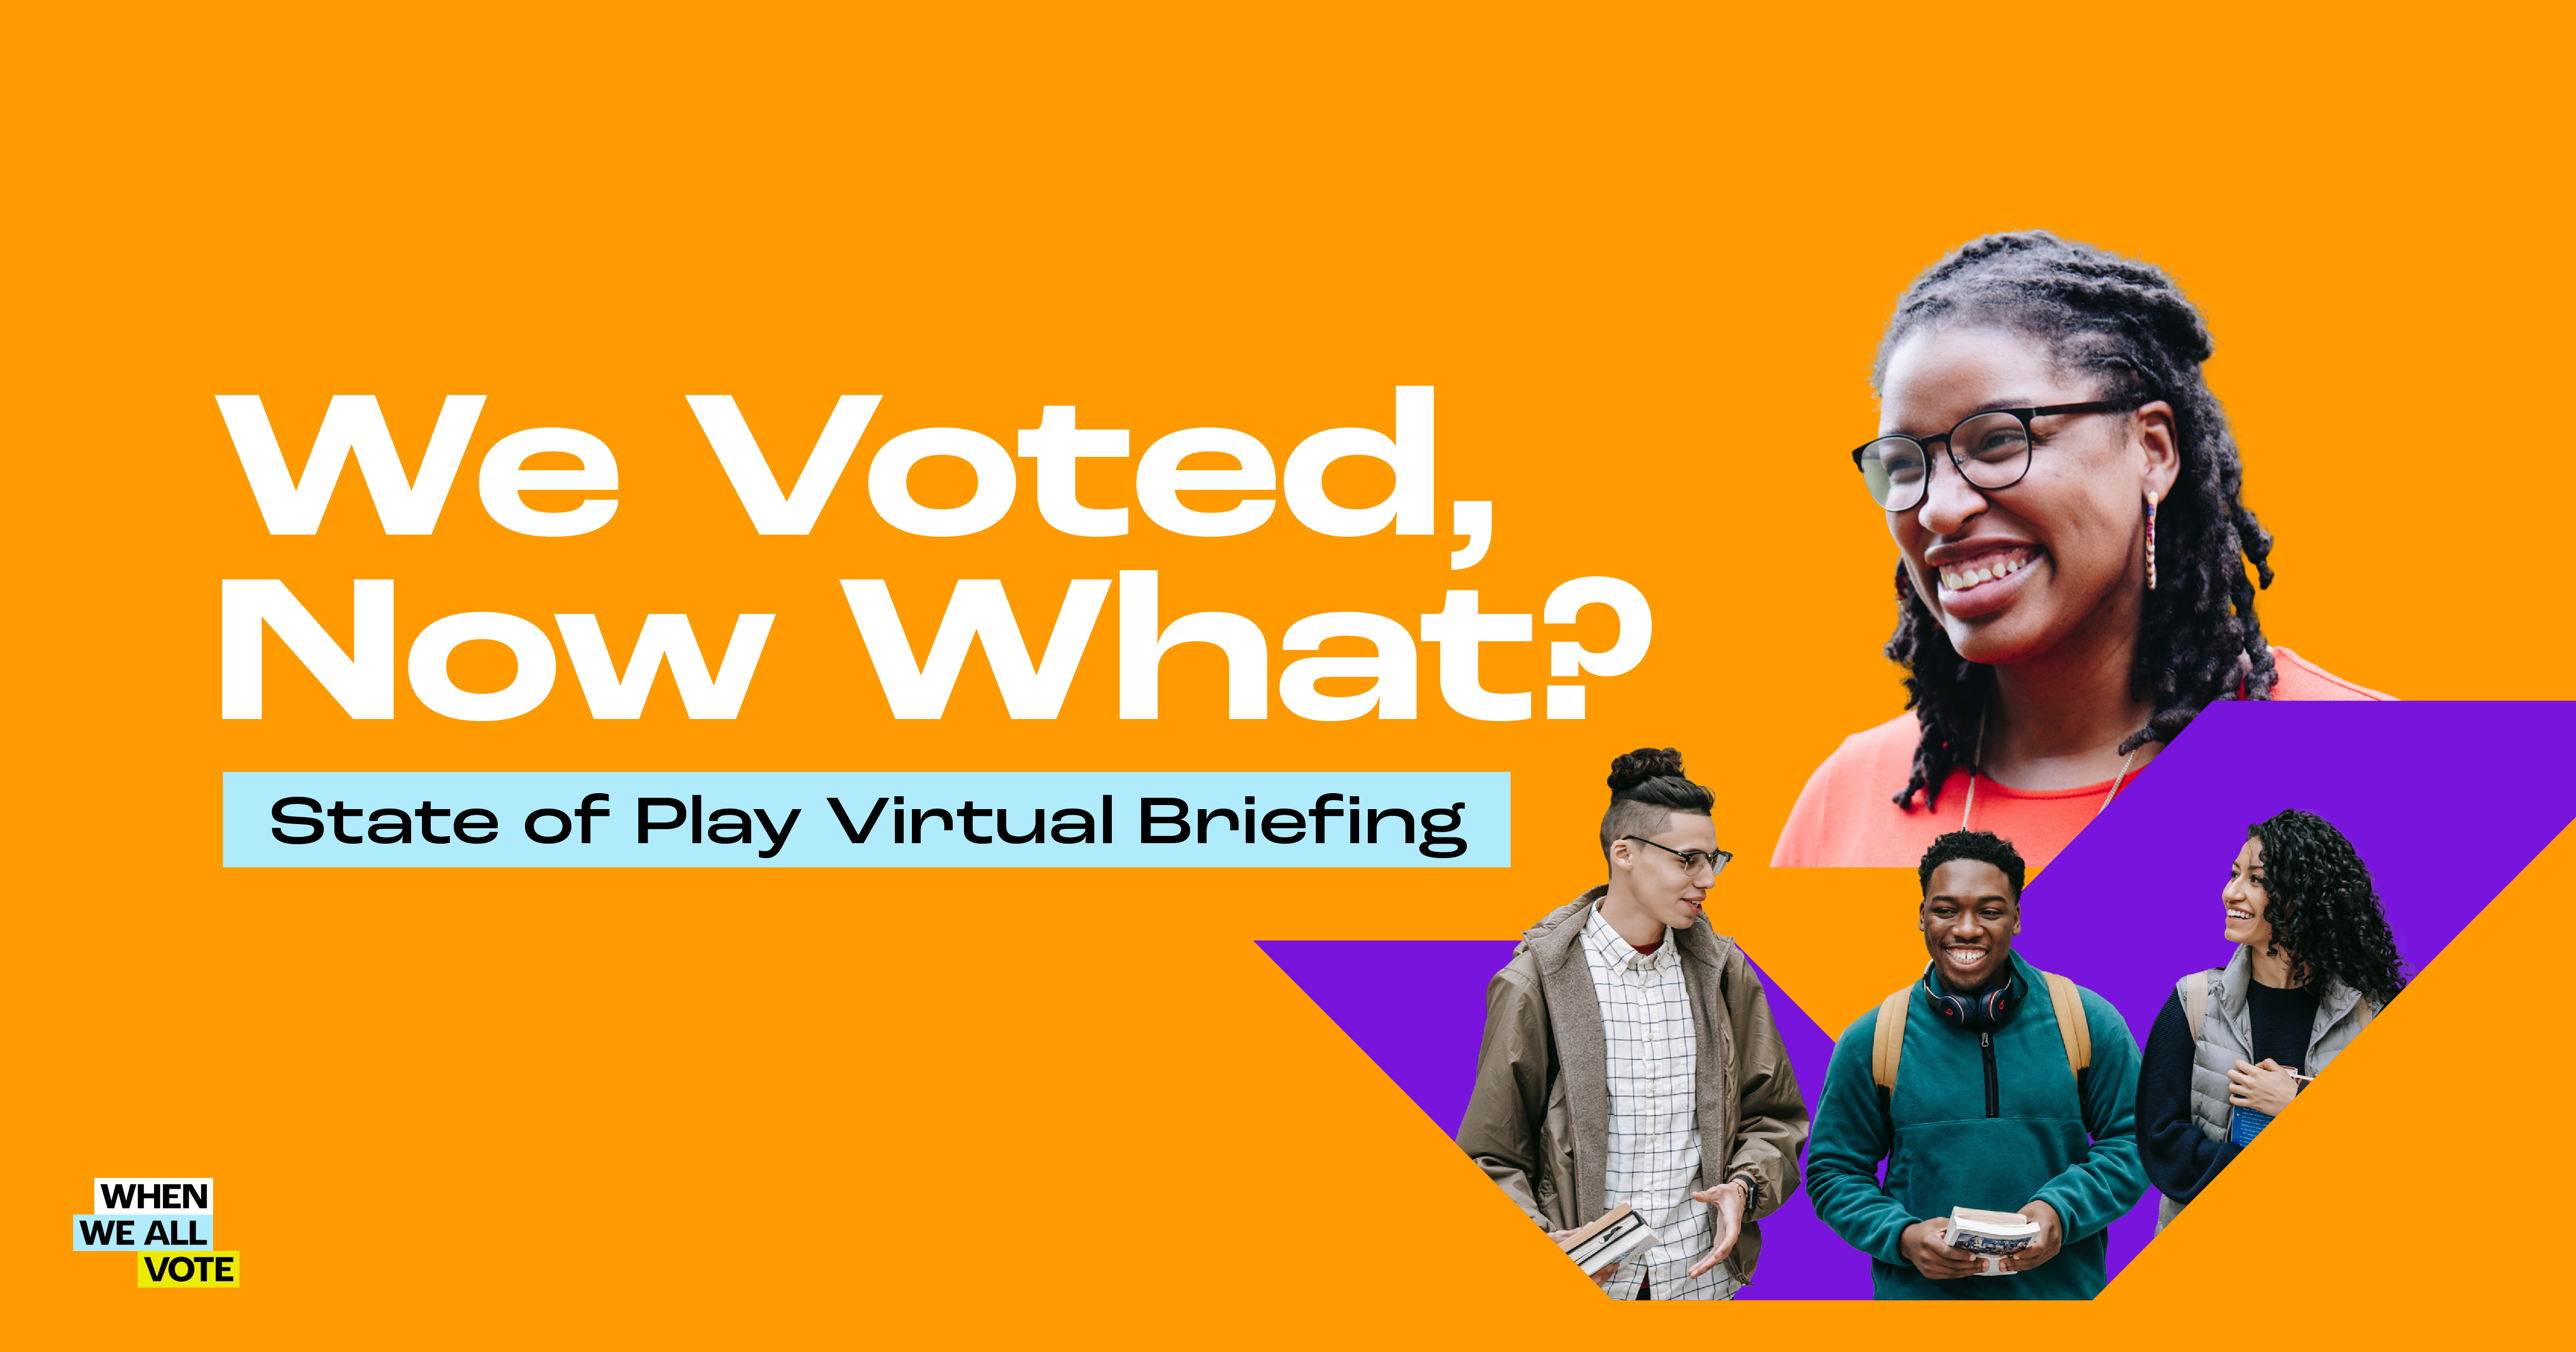 We Voted, Now What? State of Play Virtual Briefing